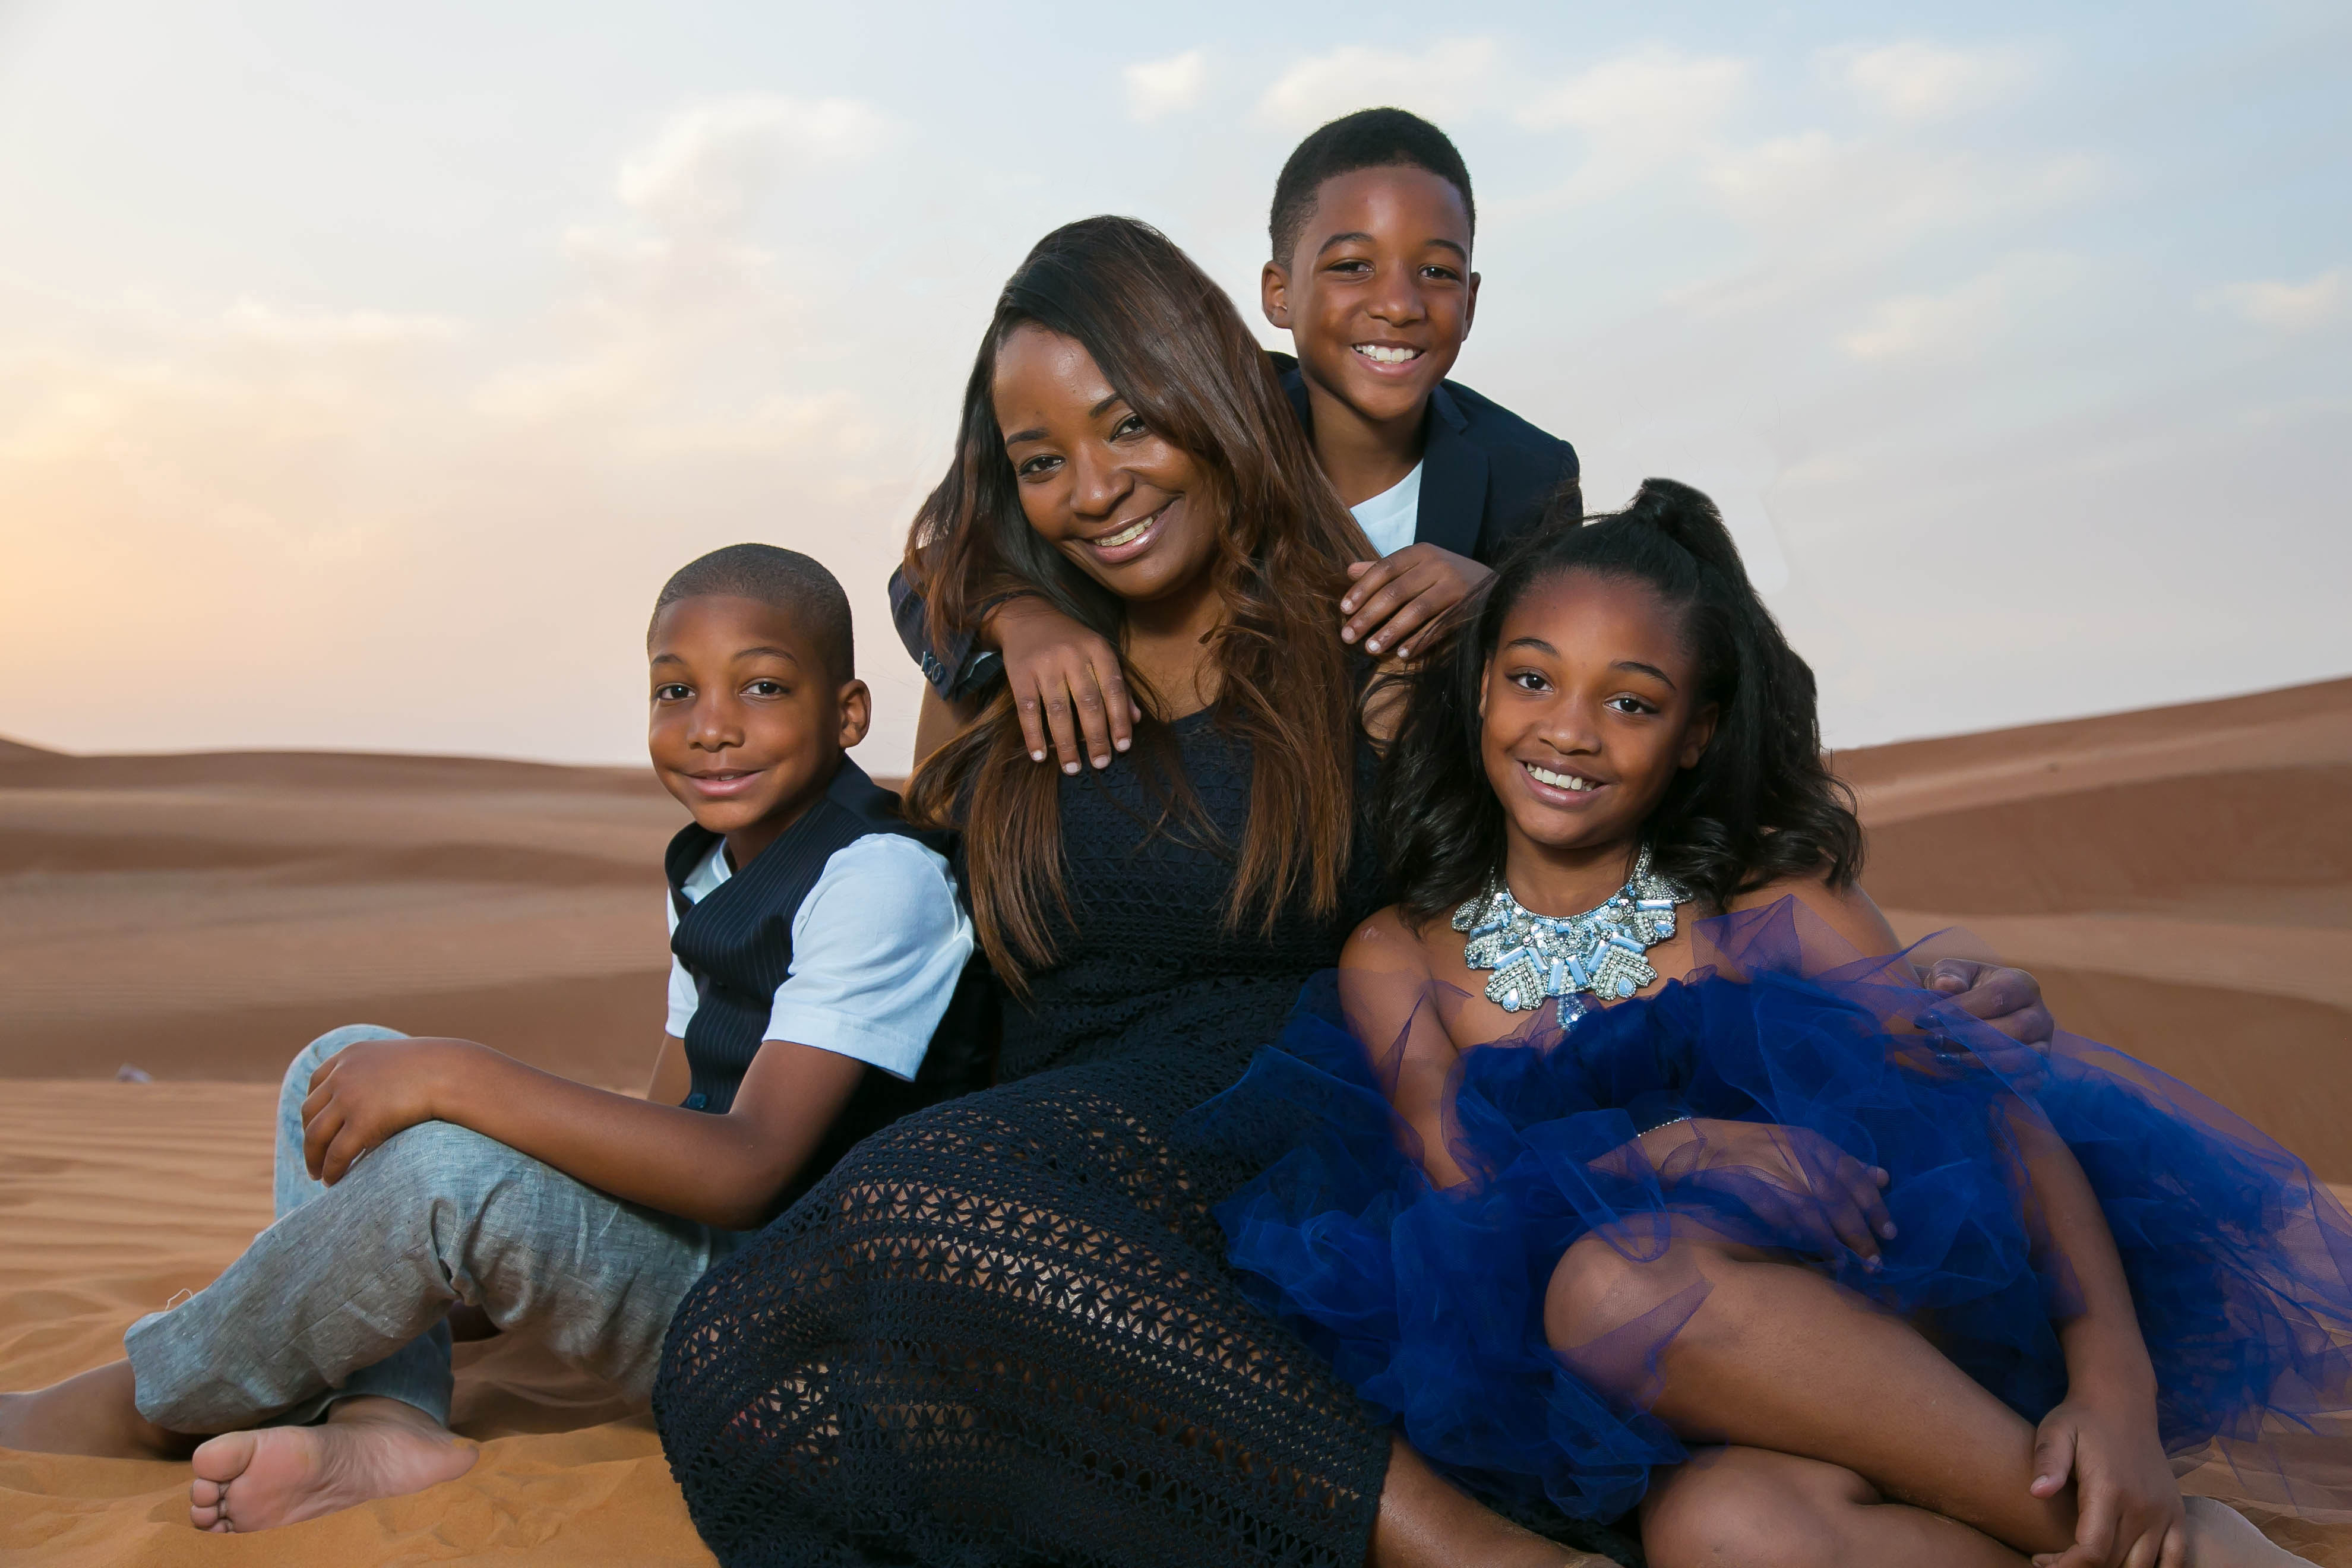 Single Mom Goes From American Hustle To Living Her Dreams In Abu Dhabi.